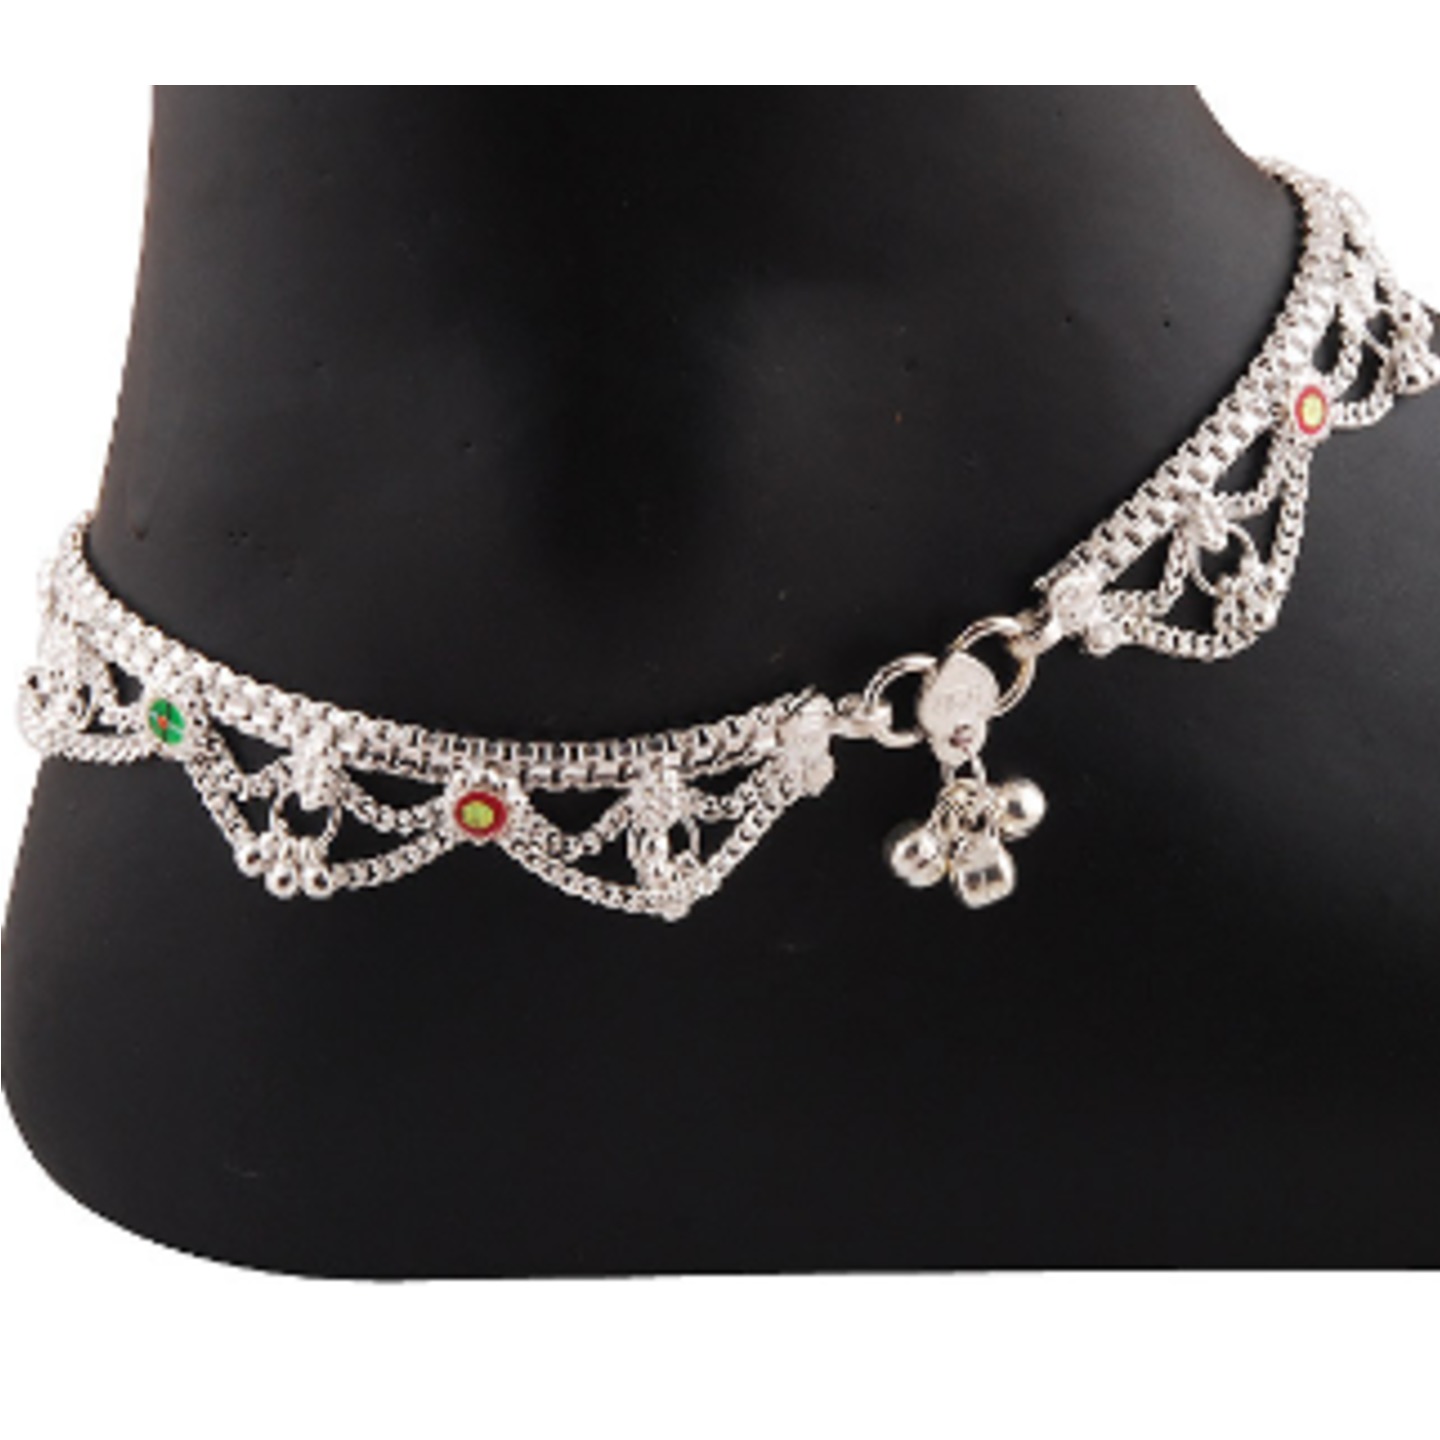 SILVER CROSS ANKLET